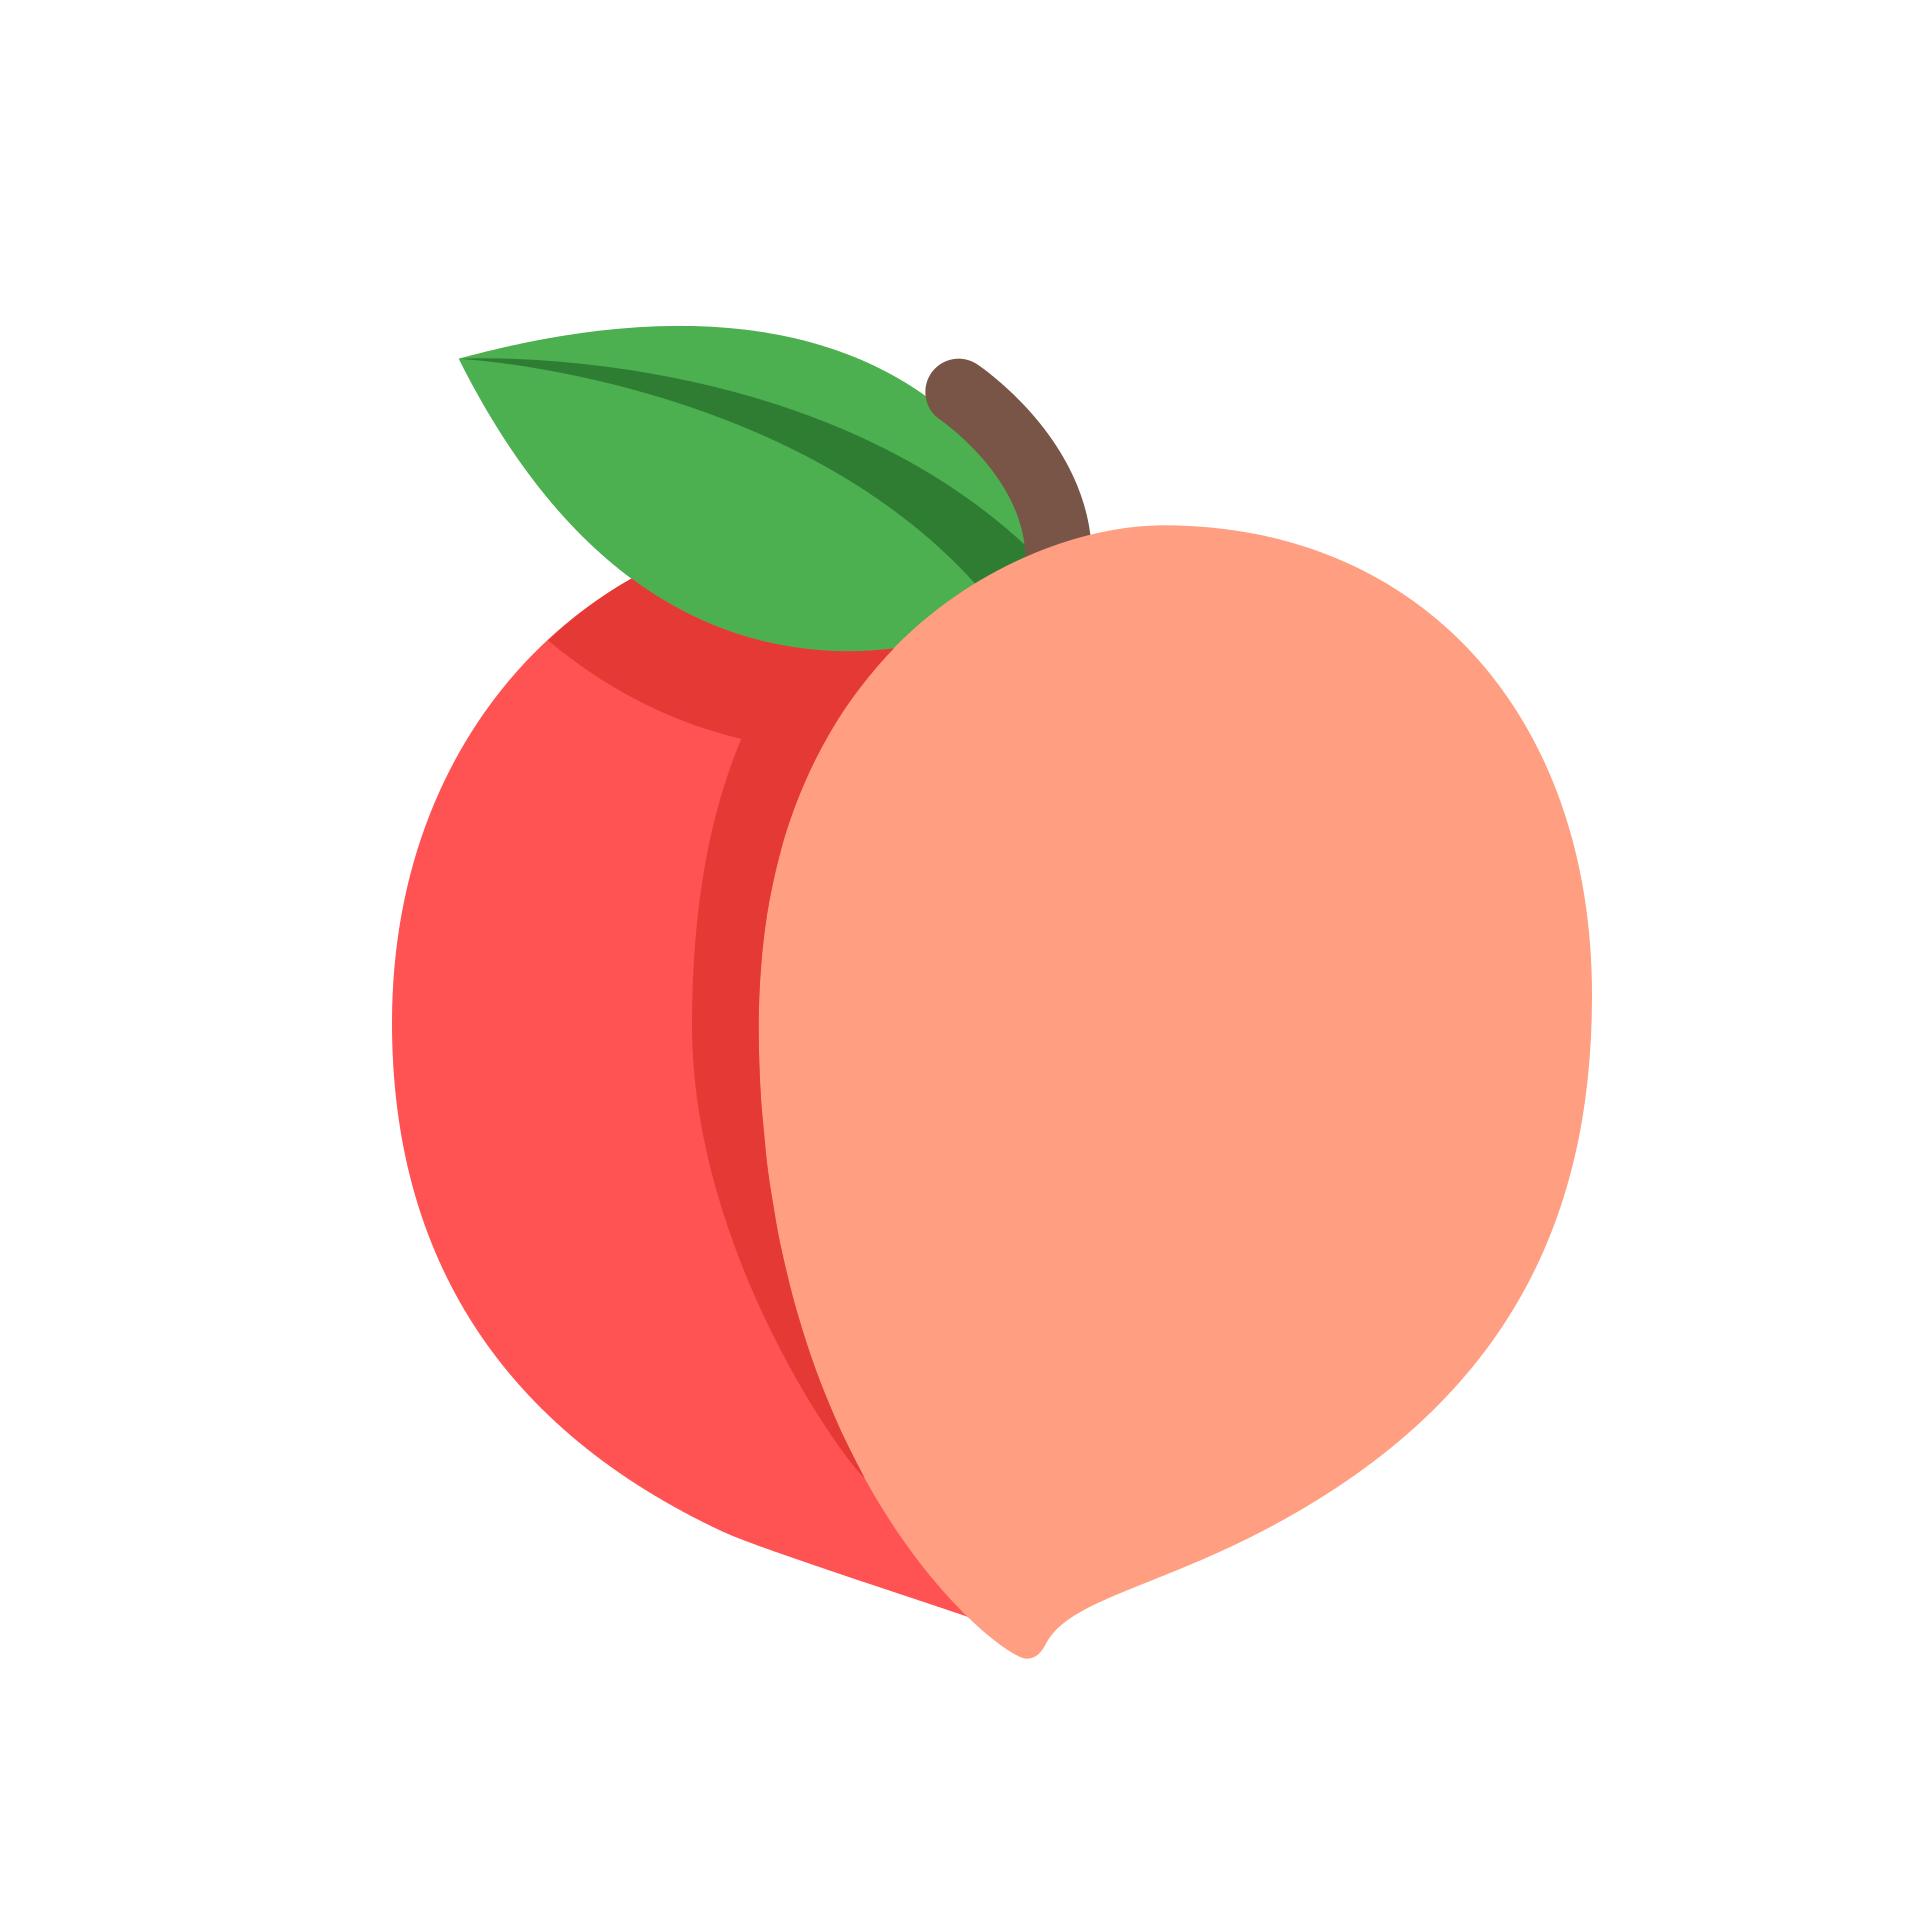 Peach Icon PNG Image in Transparent - Peach Png